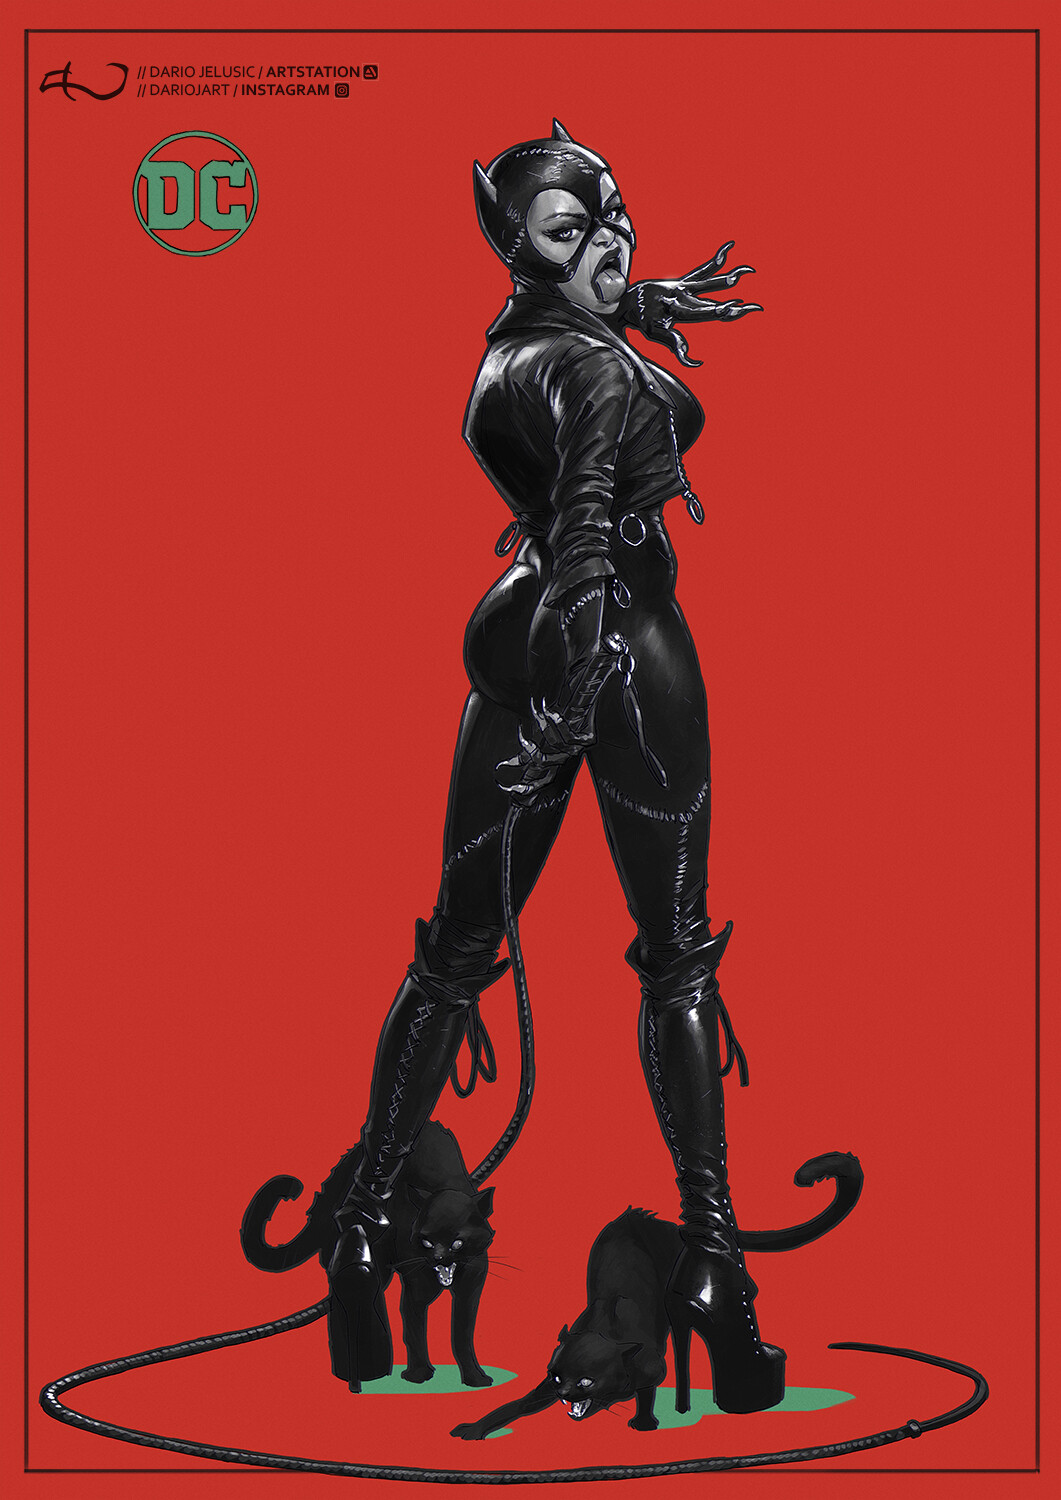 General 1061x1500 Dario Jelusic women Batman Catwoman artwork cats red background comic art tongues tongue out claws whips leather dress DC Comics comics superheroines